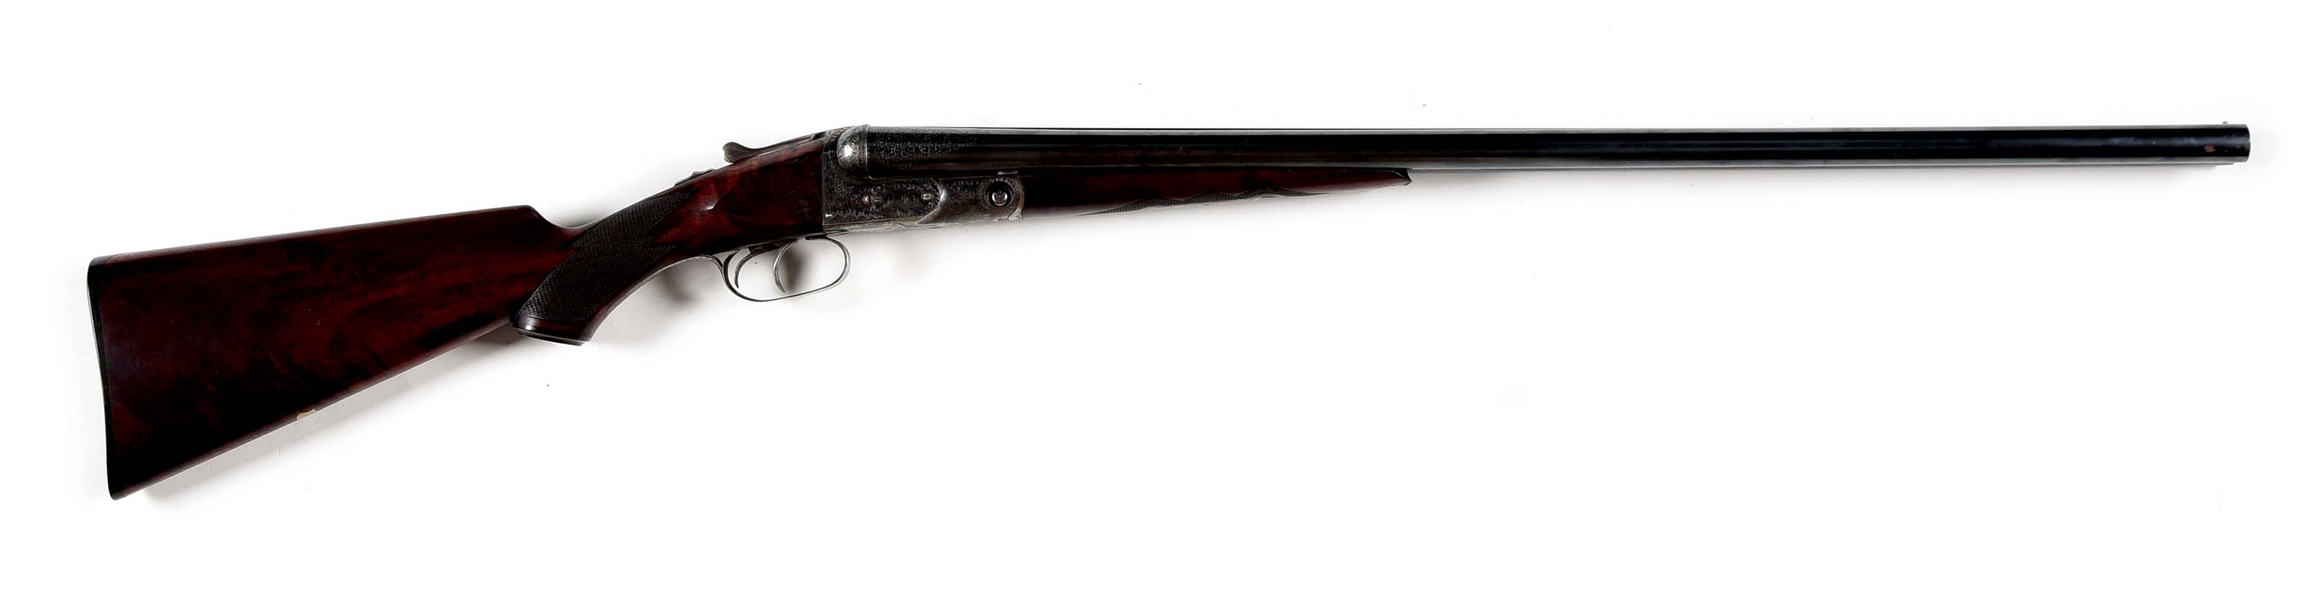 (C) STRANGE PARKER "GHE" SHOTGUN WITH WHAT APPEARS TO BE ORIGINAL EXTRA ENGRAVING OF FLOWERS, LEAVES, AND TENDRILS.